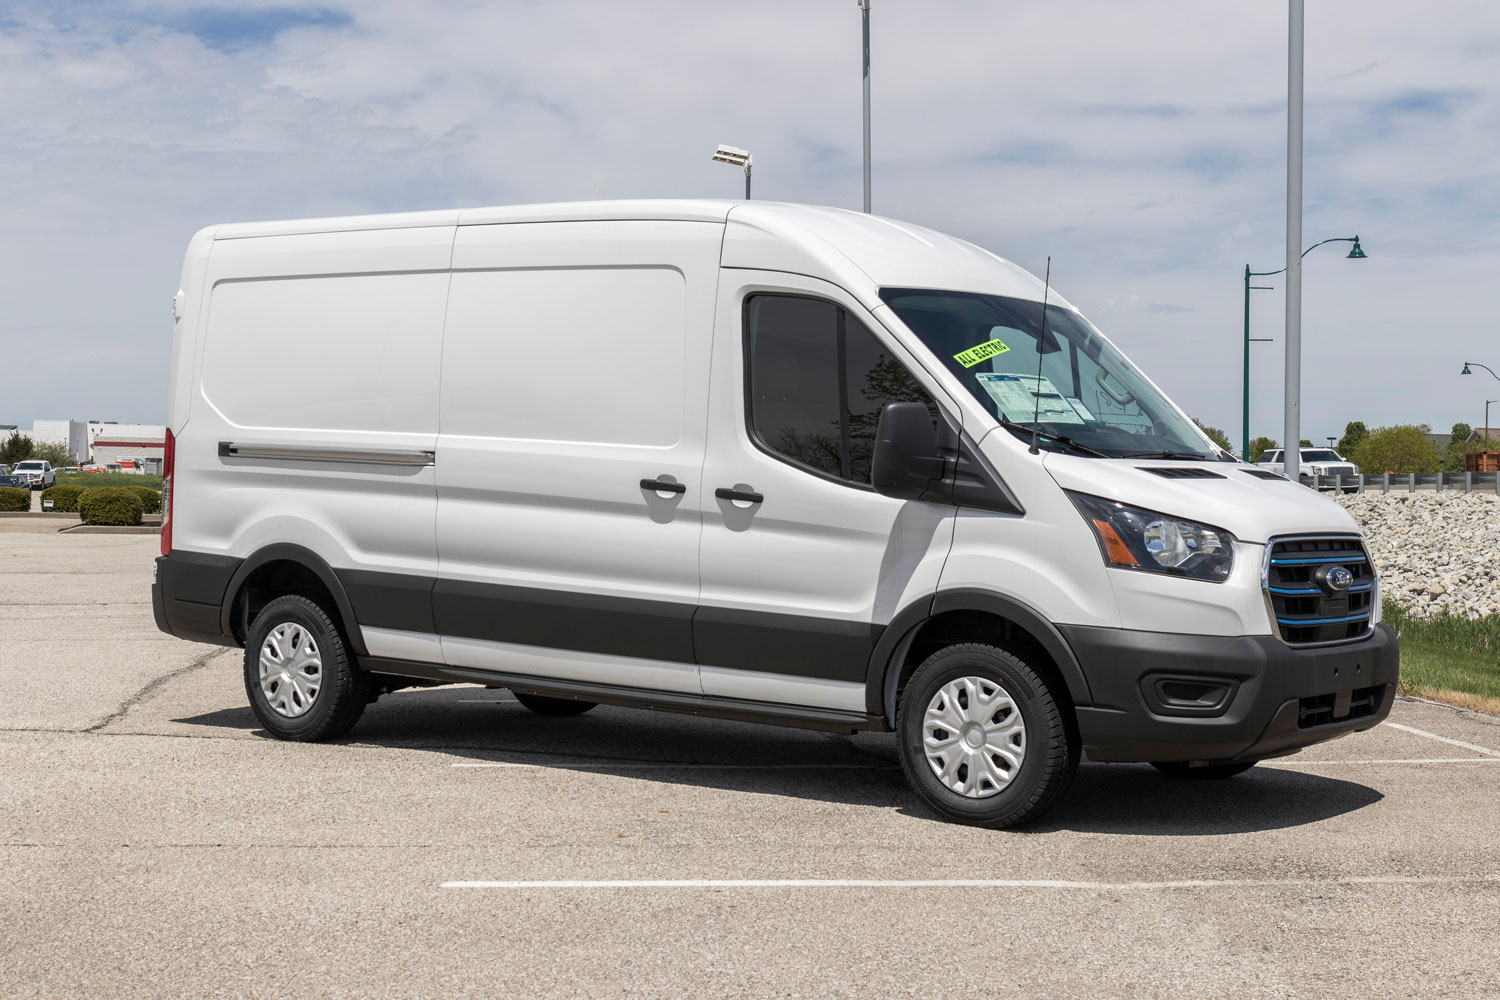 Ford E-Transit Cargo Van at a dealership. The Ford E-Transit has an electric motor providing 266hp with a maximum payload of 3,880 pounds.